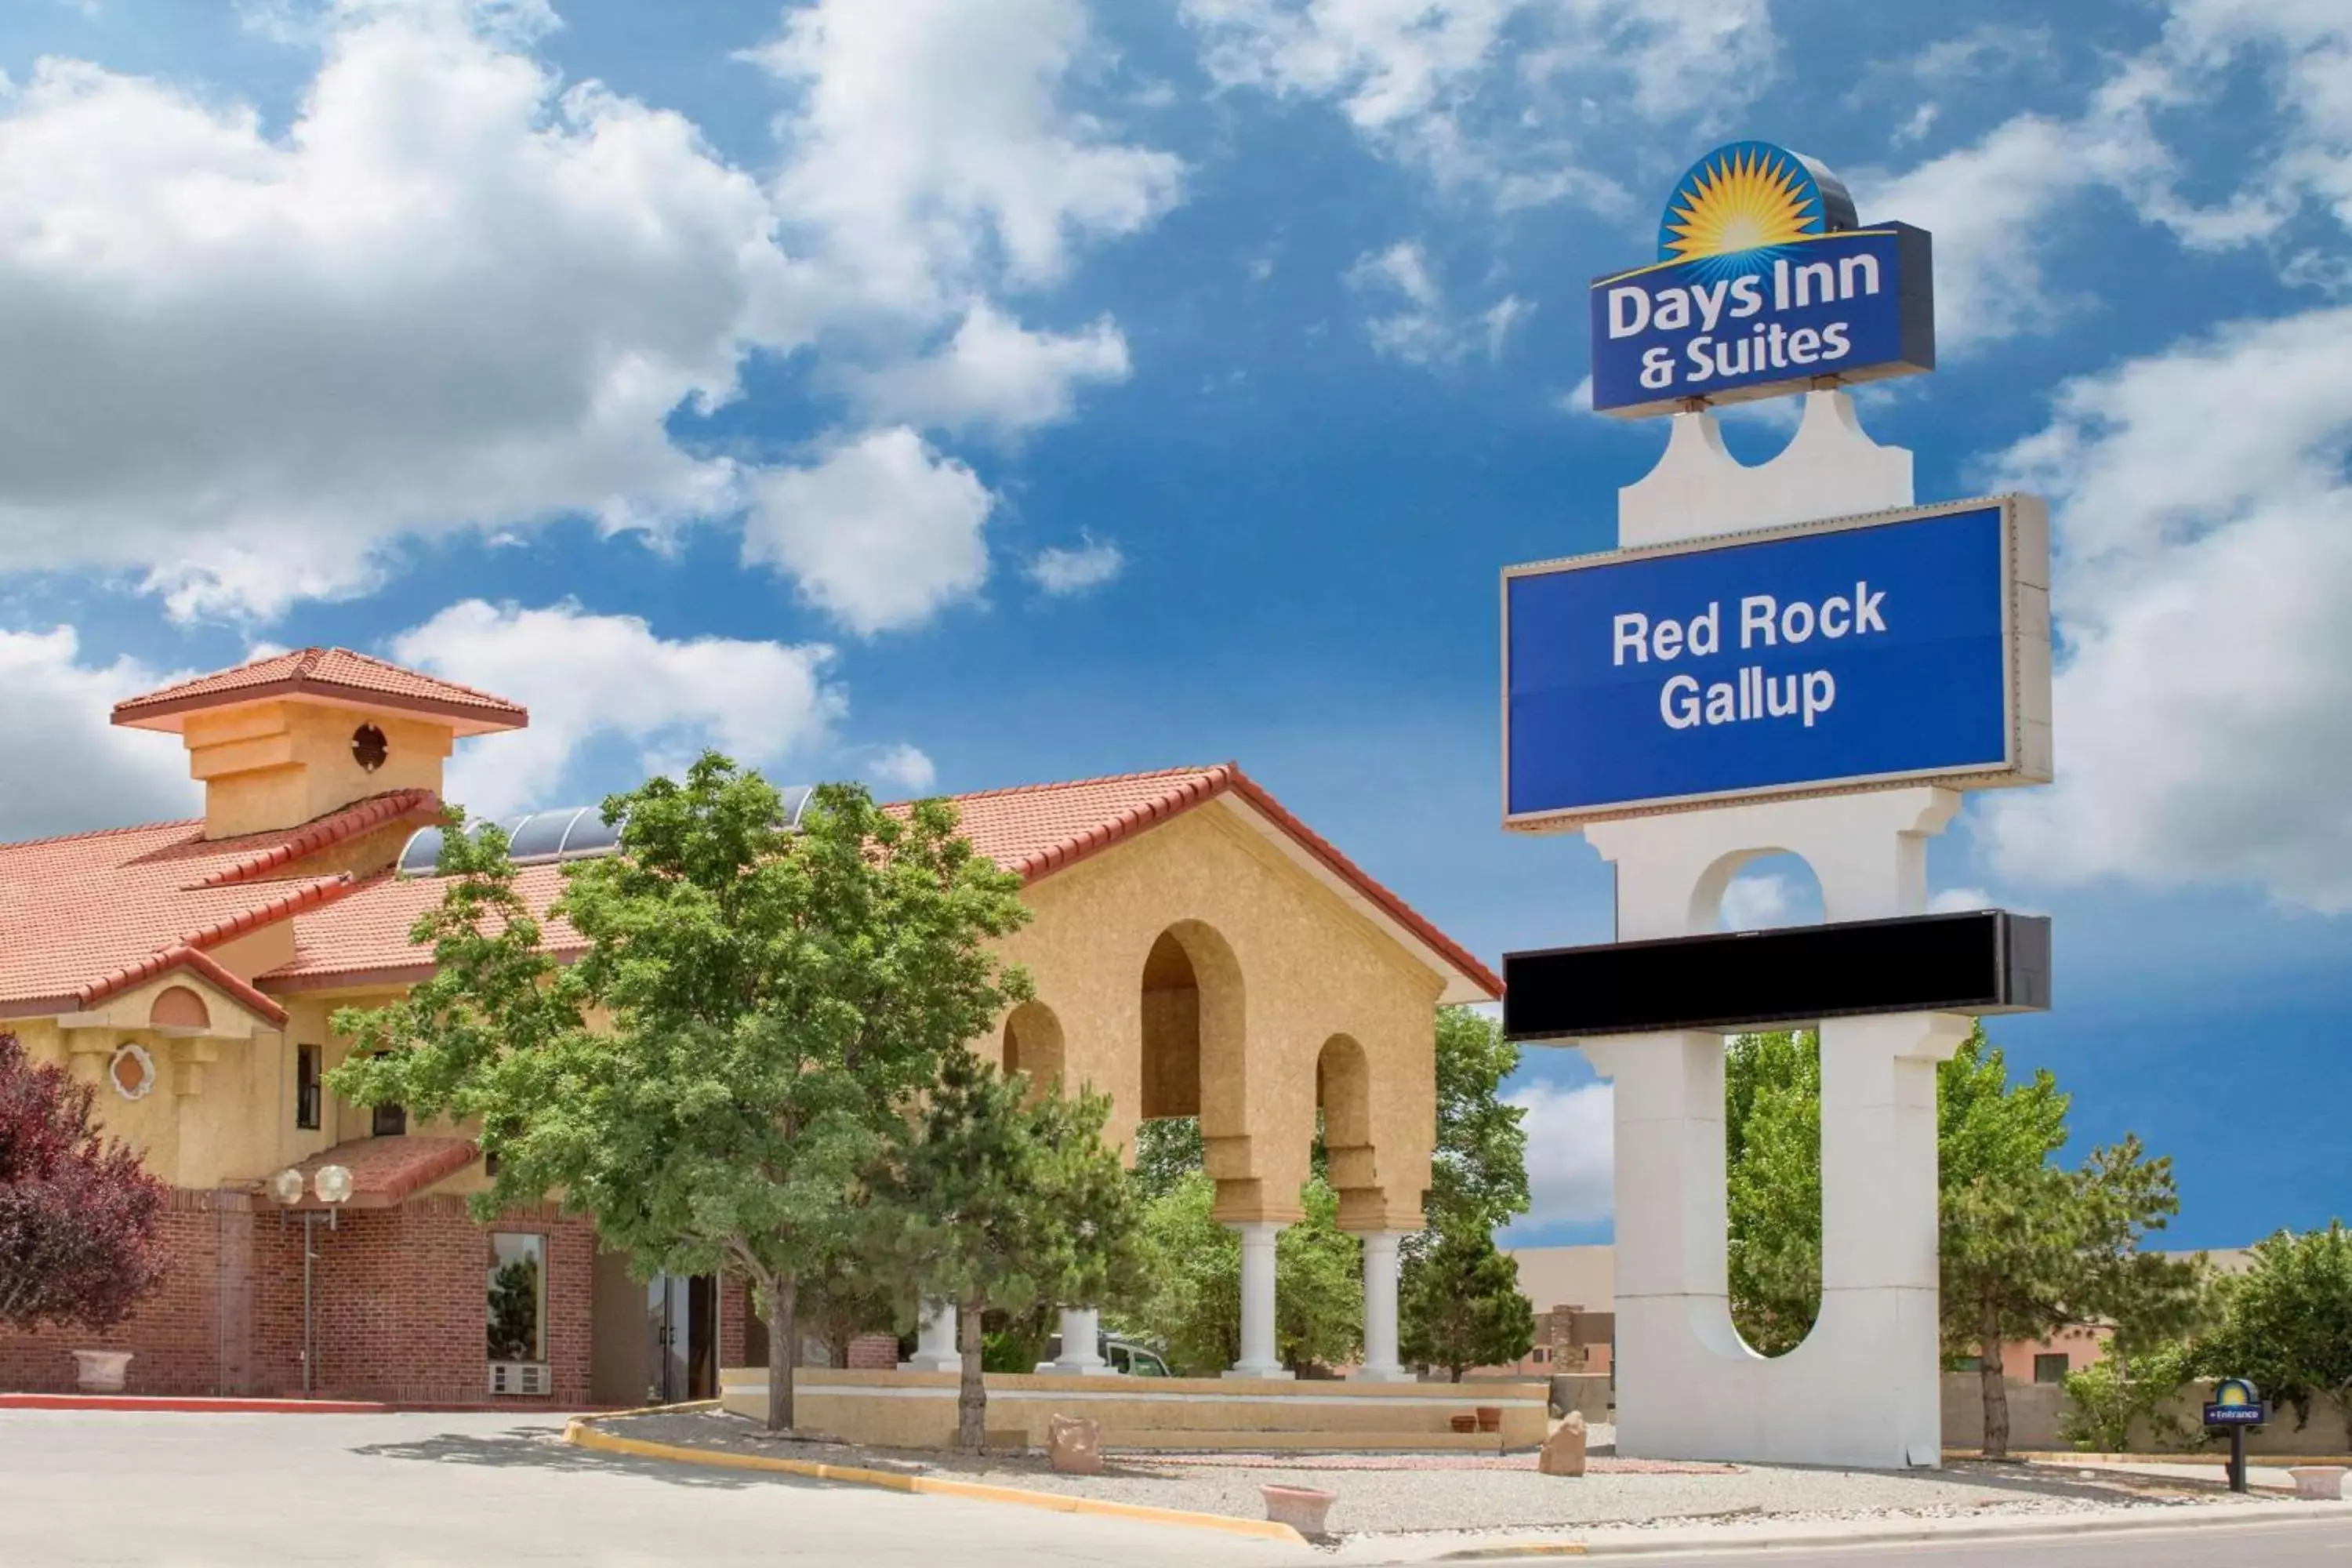 Property building in Days Inn & Suites by Wyndham Red Rock-Gallup